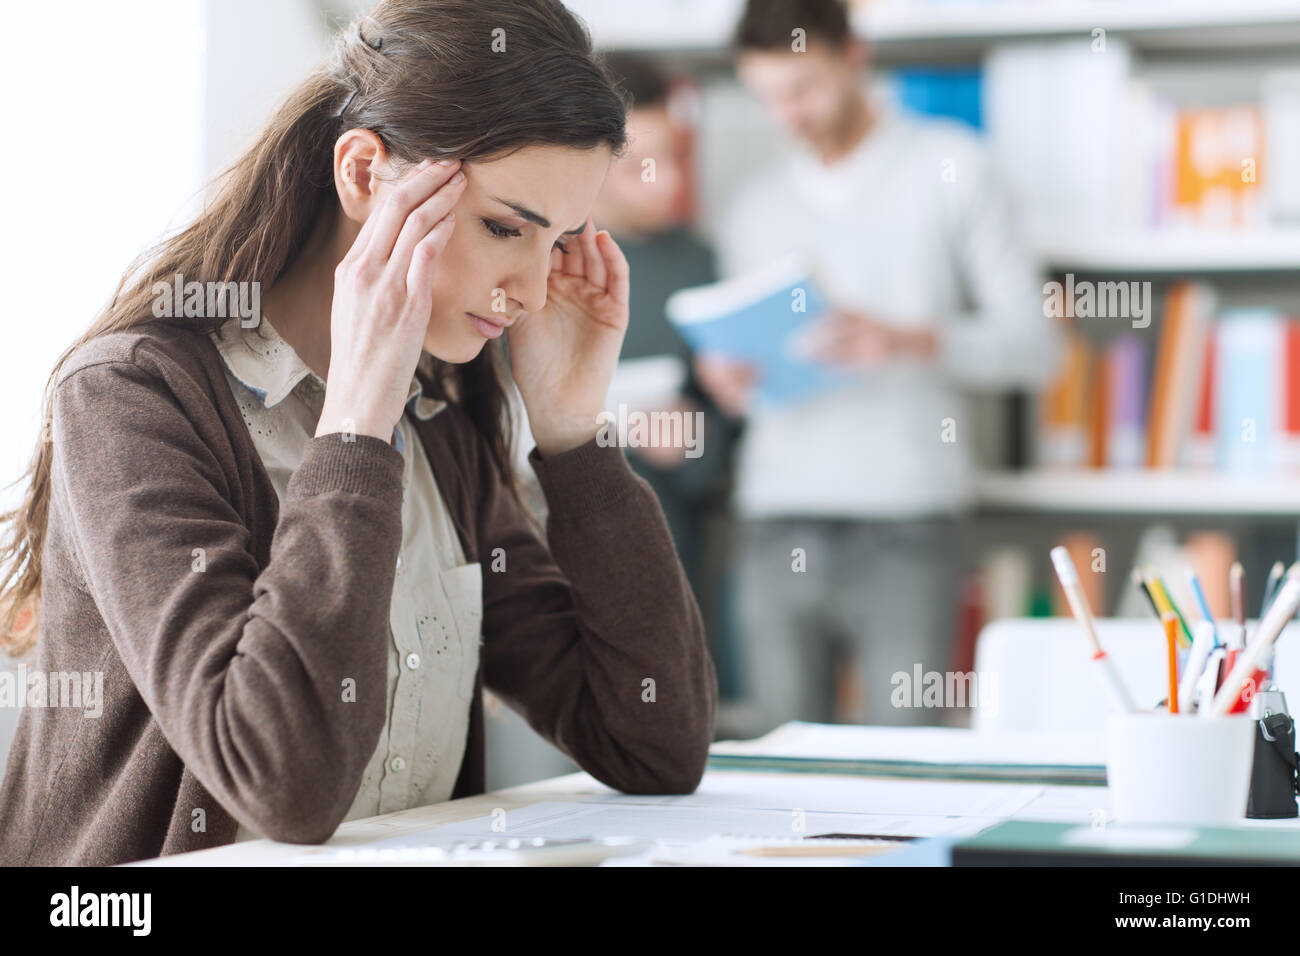 Young female student with headache, she is sitting at desk and touching her head Stock Photo